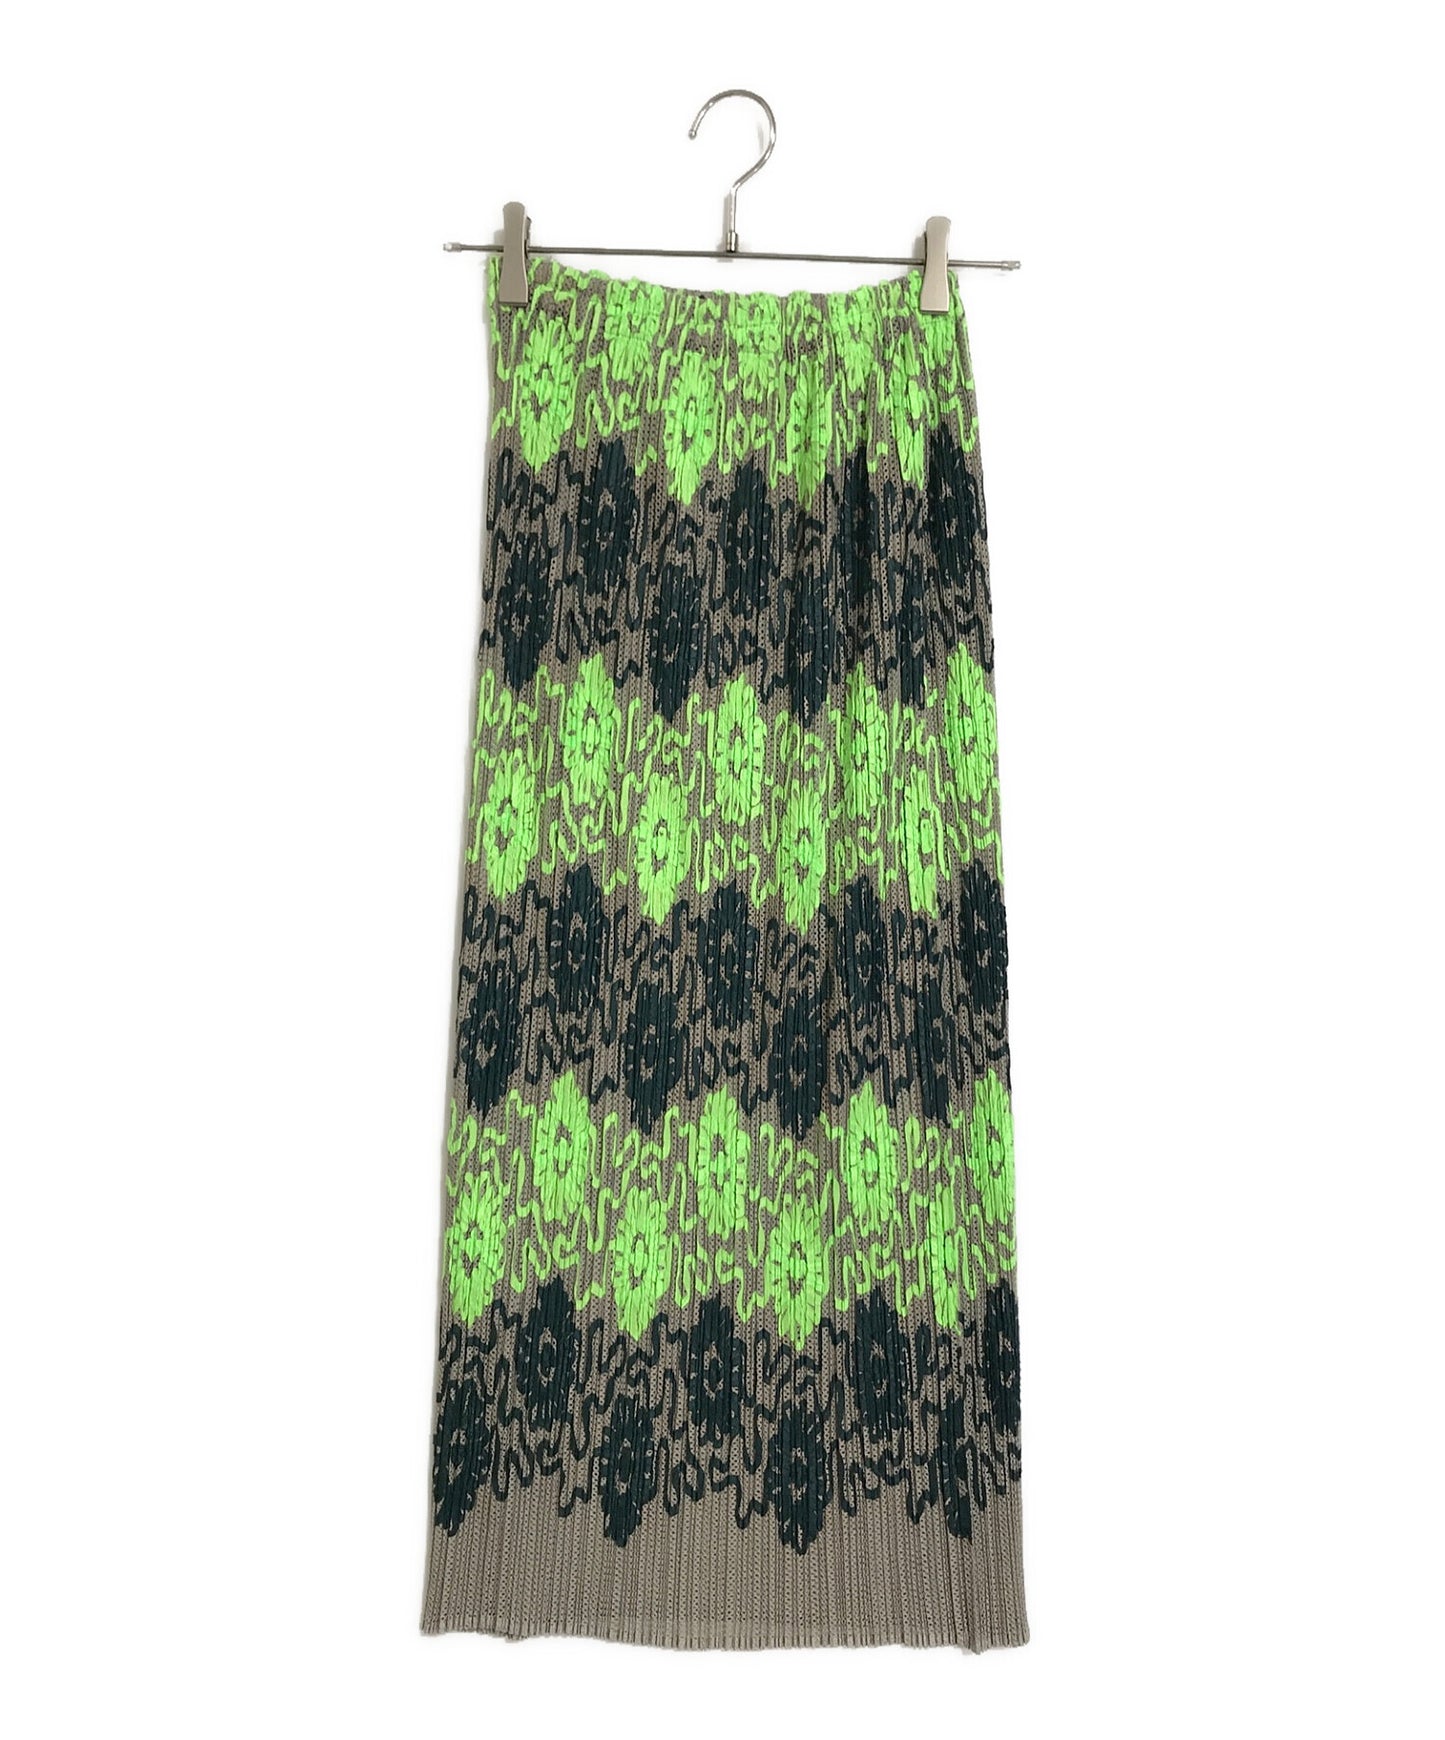 [Pre-owned] PLEATS PLEASE Flower print pleated skirt PLEATS PLEASE pleats pleats pleats olive x green x yellowish green size 1 Issey Miyake PP06-JG901